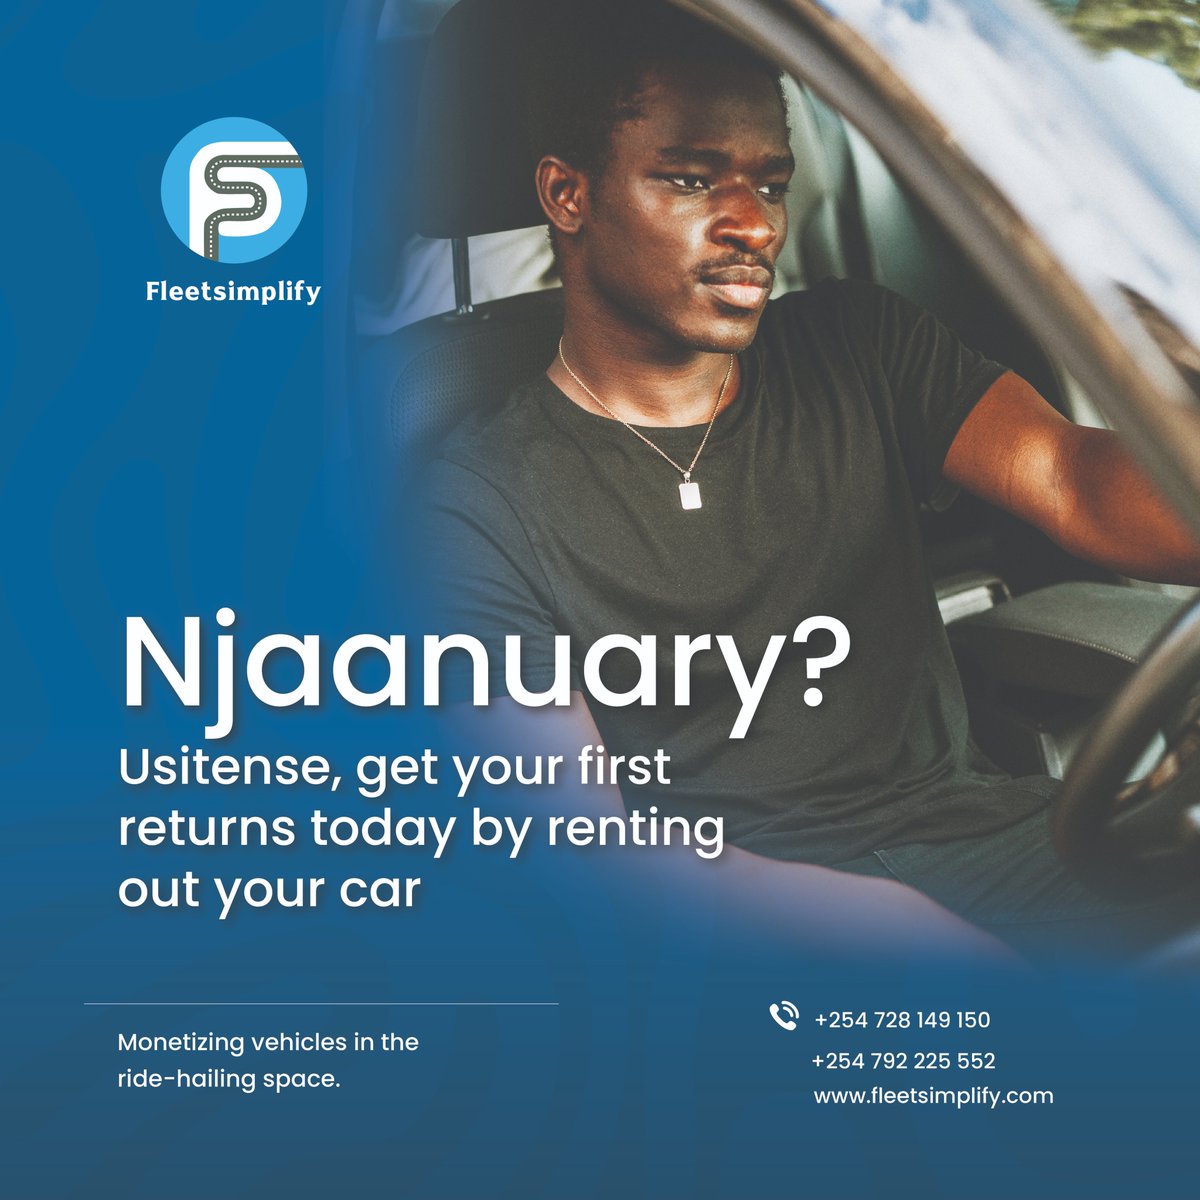 Cruise through Njaanuary with confidence! Maximize your earnings by renting out your car to fleet simplify. Secure a guaranteed 36,000/- on day one
#newbeginnings #newbusinessopportunities #sidehustle #focused #moneymatters #passionproject #passionandpurpose